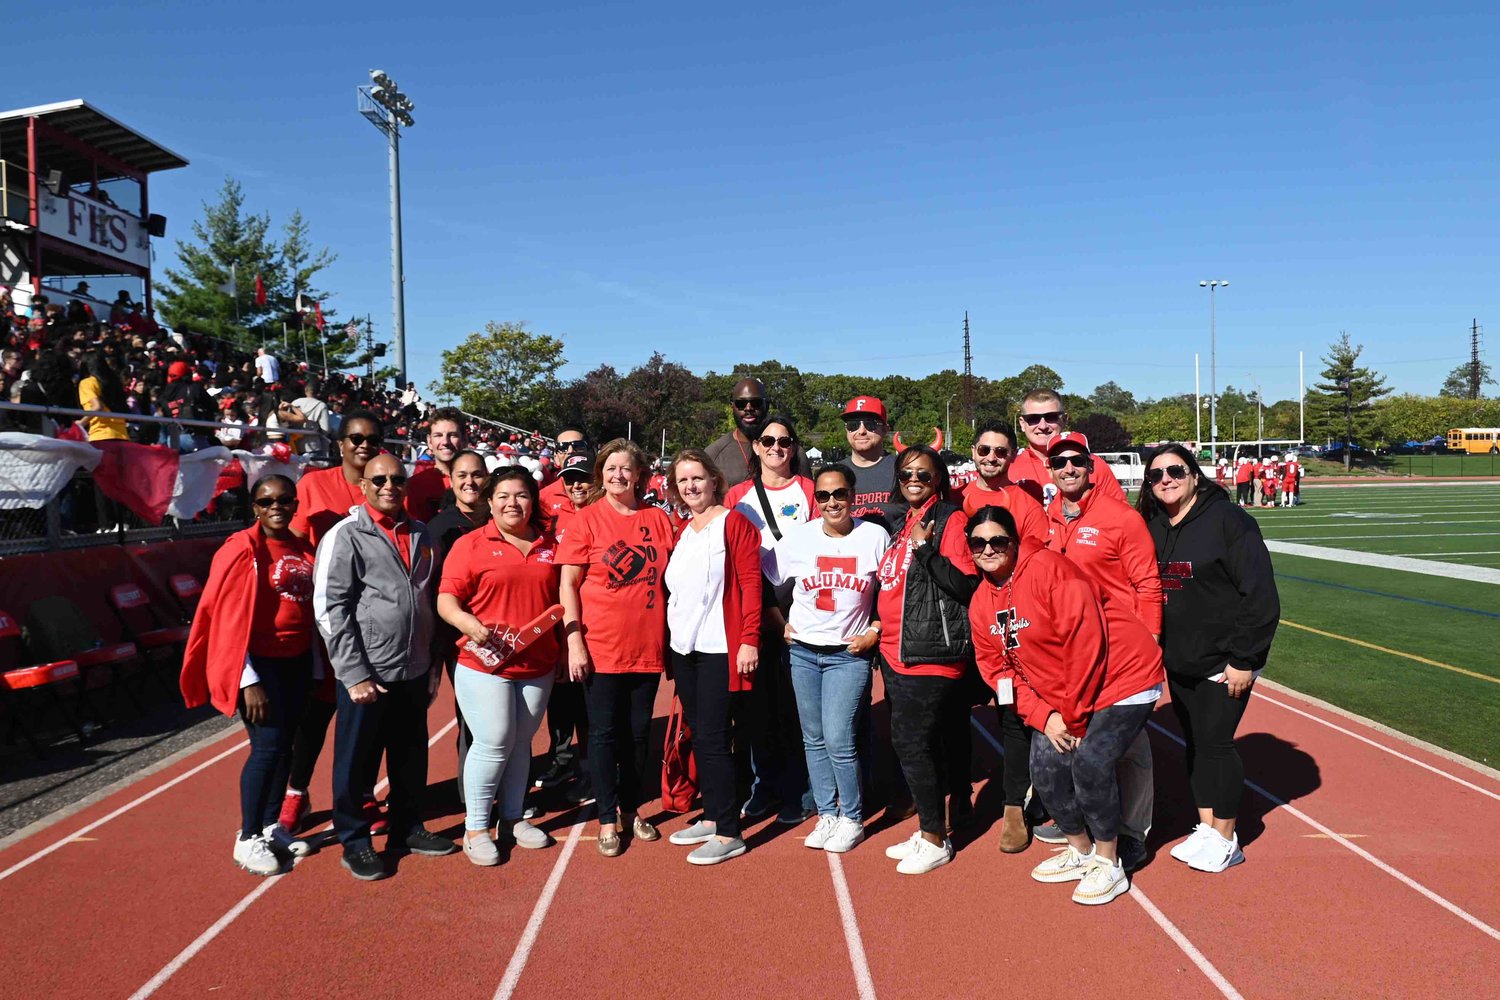 Superintendent of Schools Dr. Kishore Kuncham (second from left front row) and Board of Education President Maria Jordan-Awalom (third from left front row) were joined by administrators and local political representatives during homecoming.